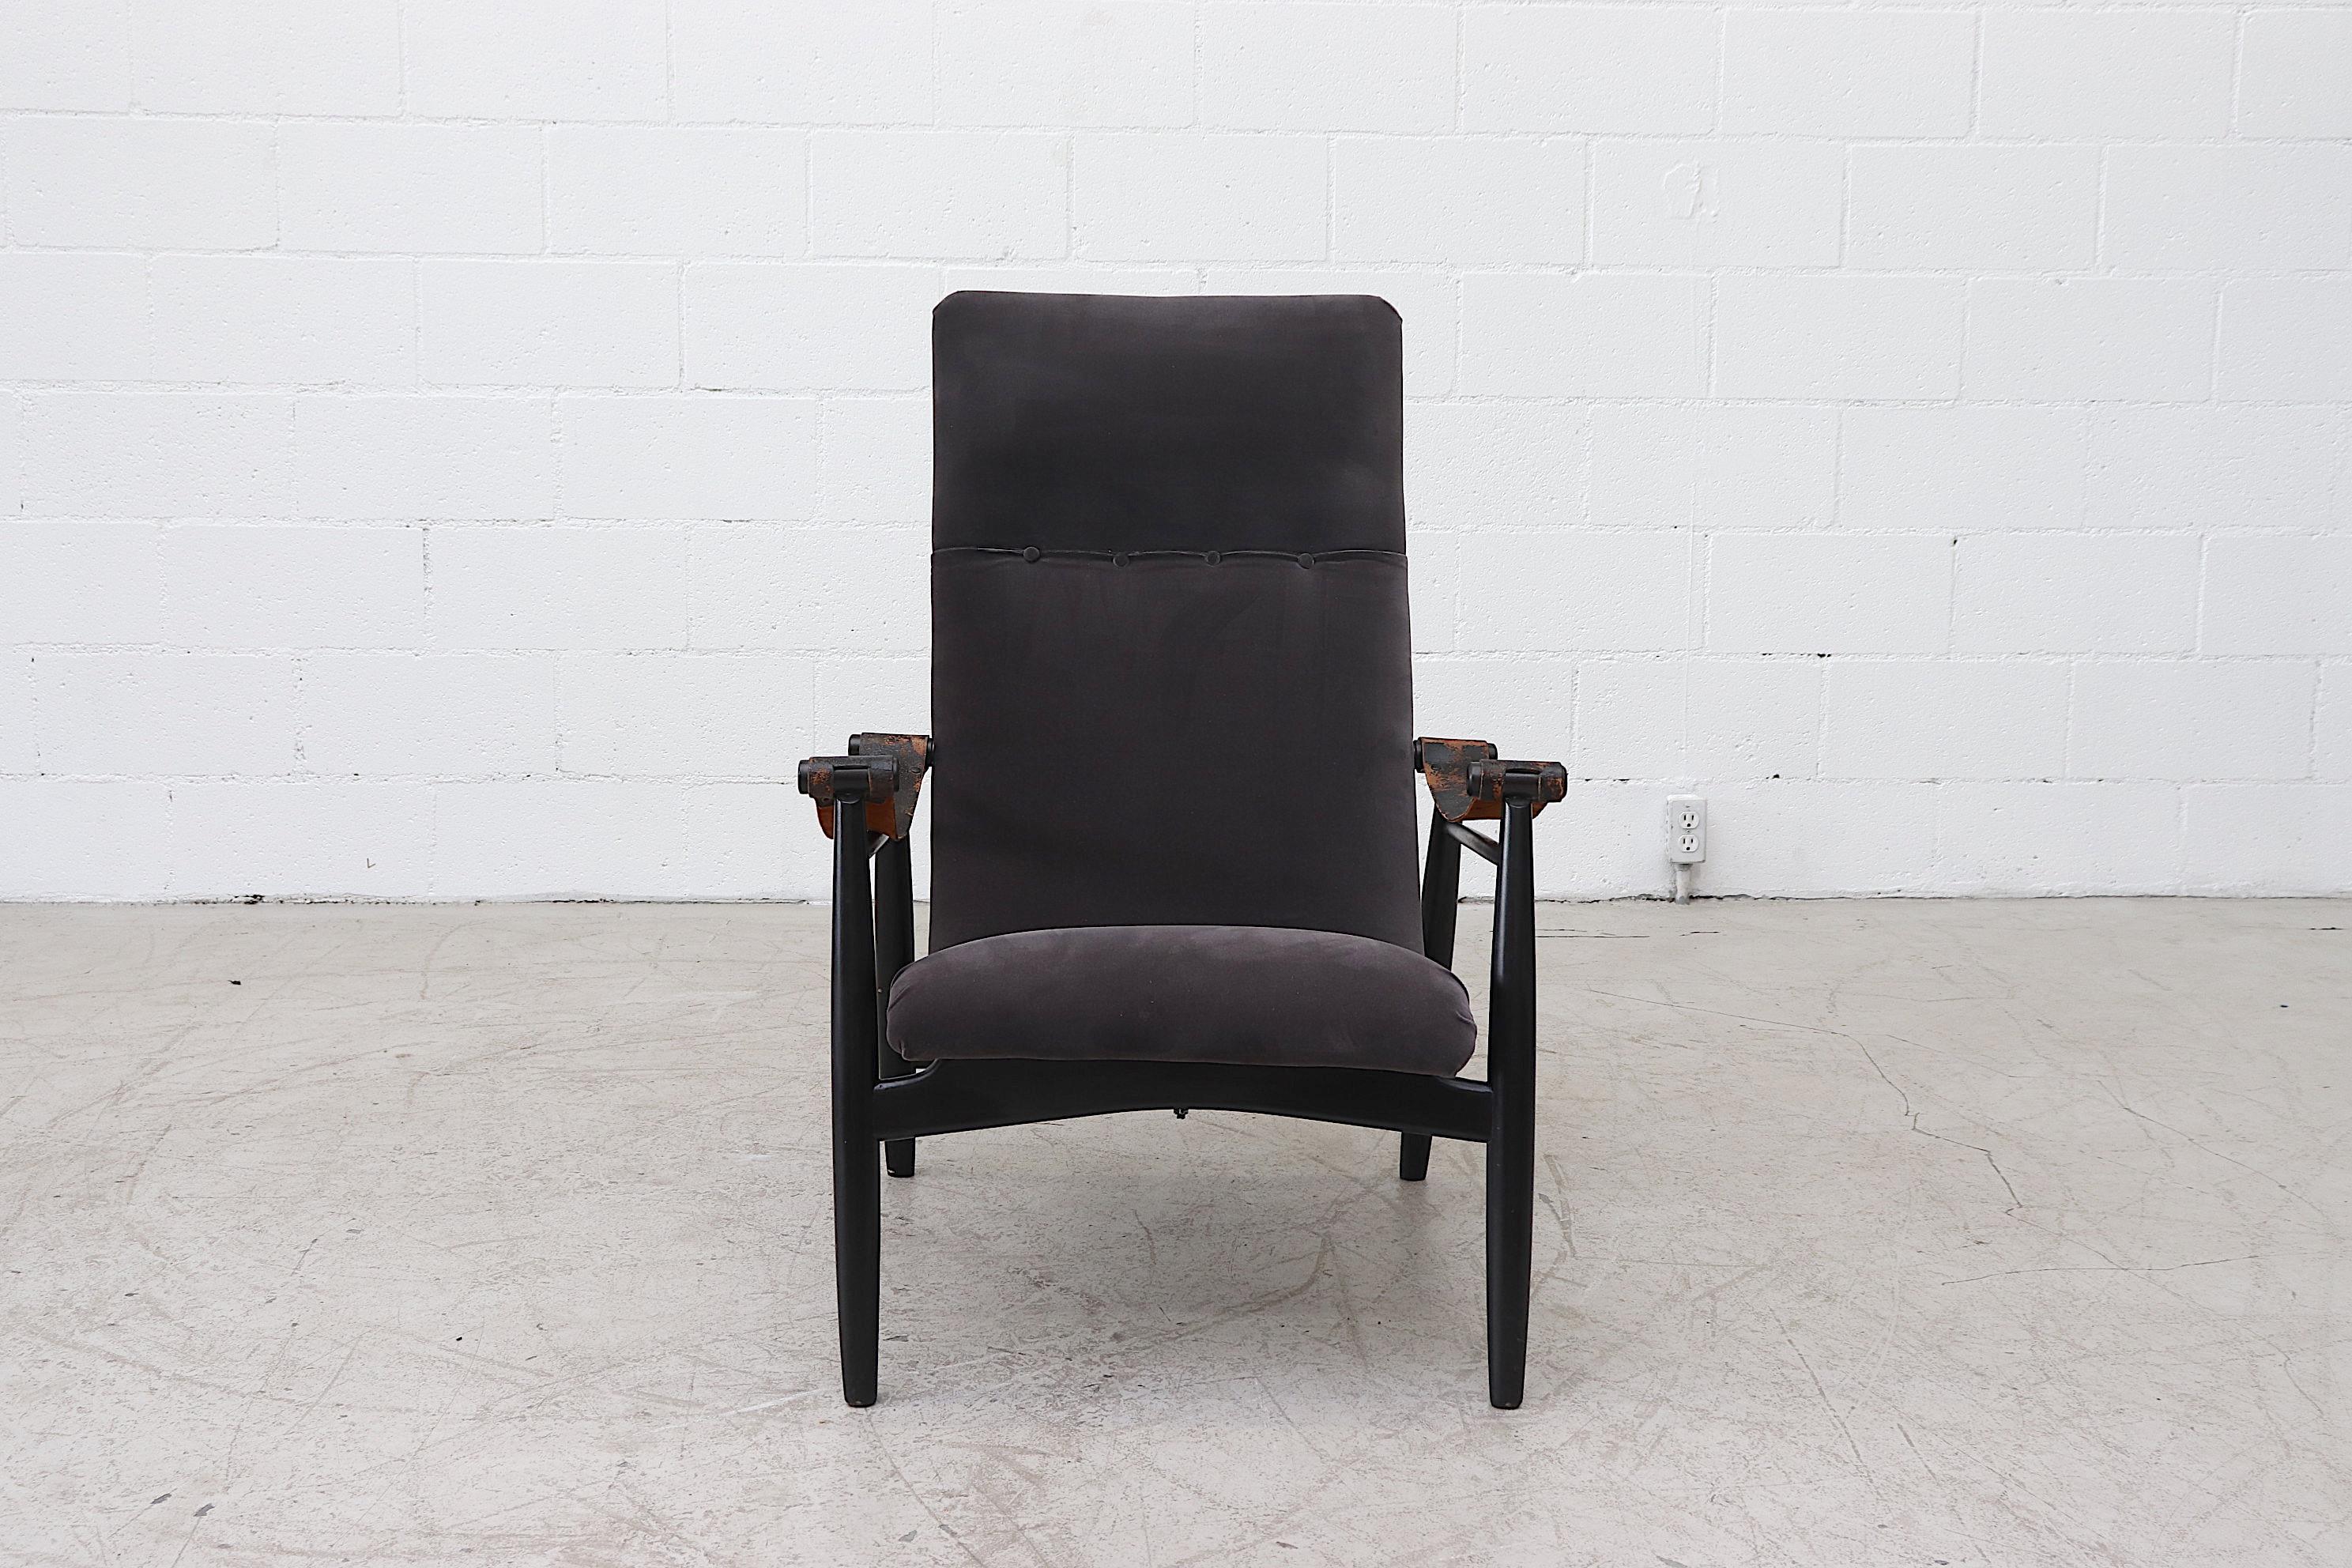 Beautifully regal Piet Muntendam lounge chair newly upholstered in dark grey velvet with lightly refinished wood frame and original leather armrest straps with visible patina and wear.